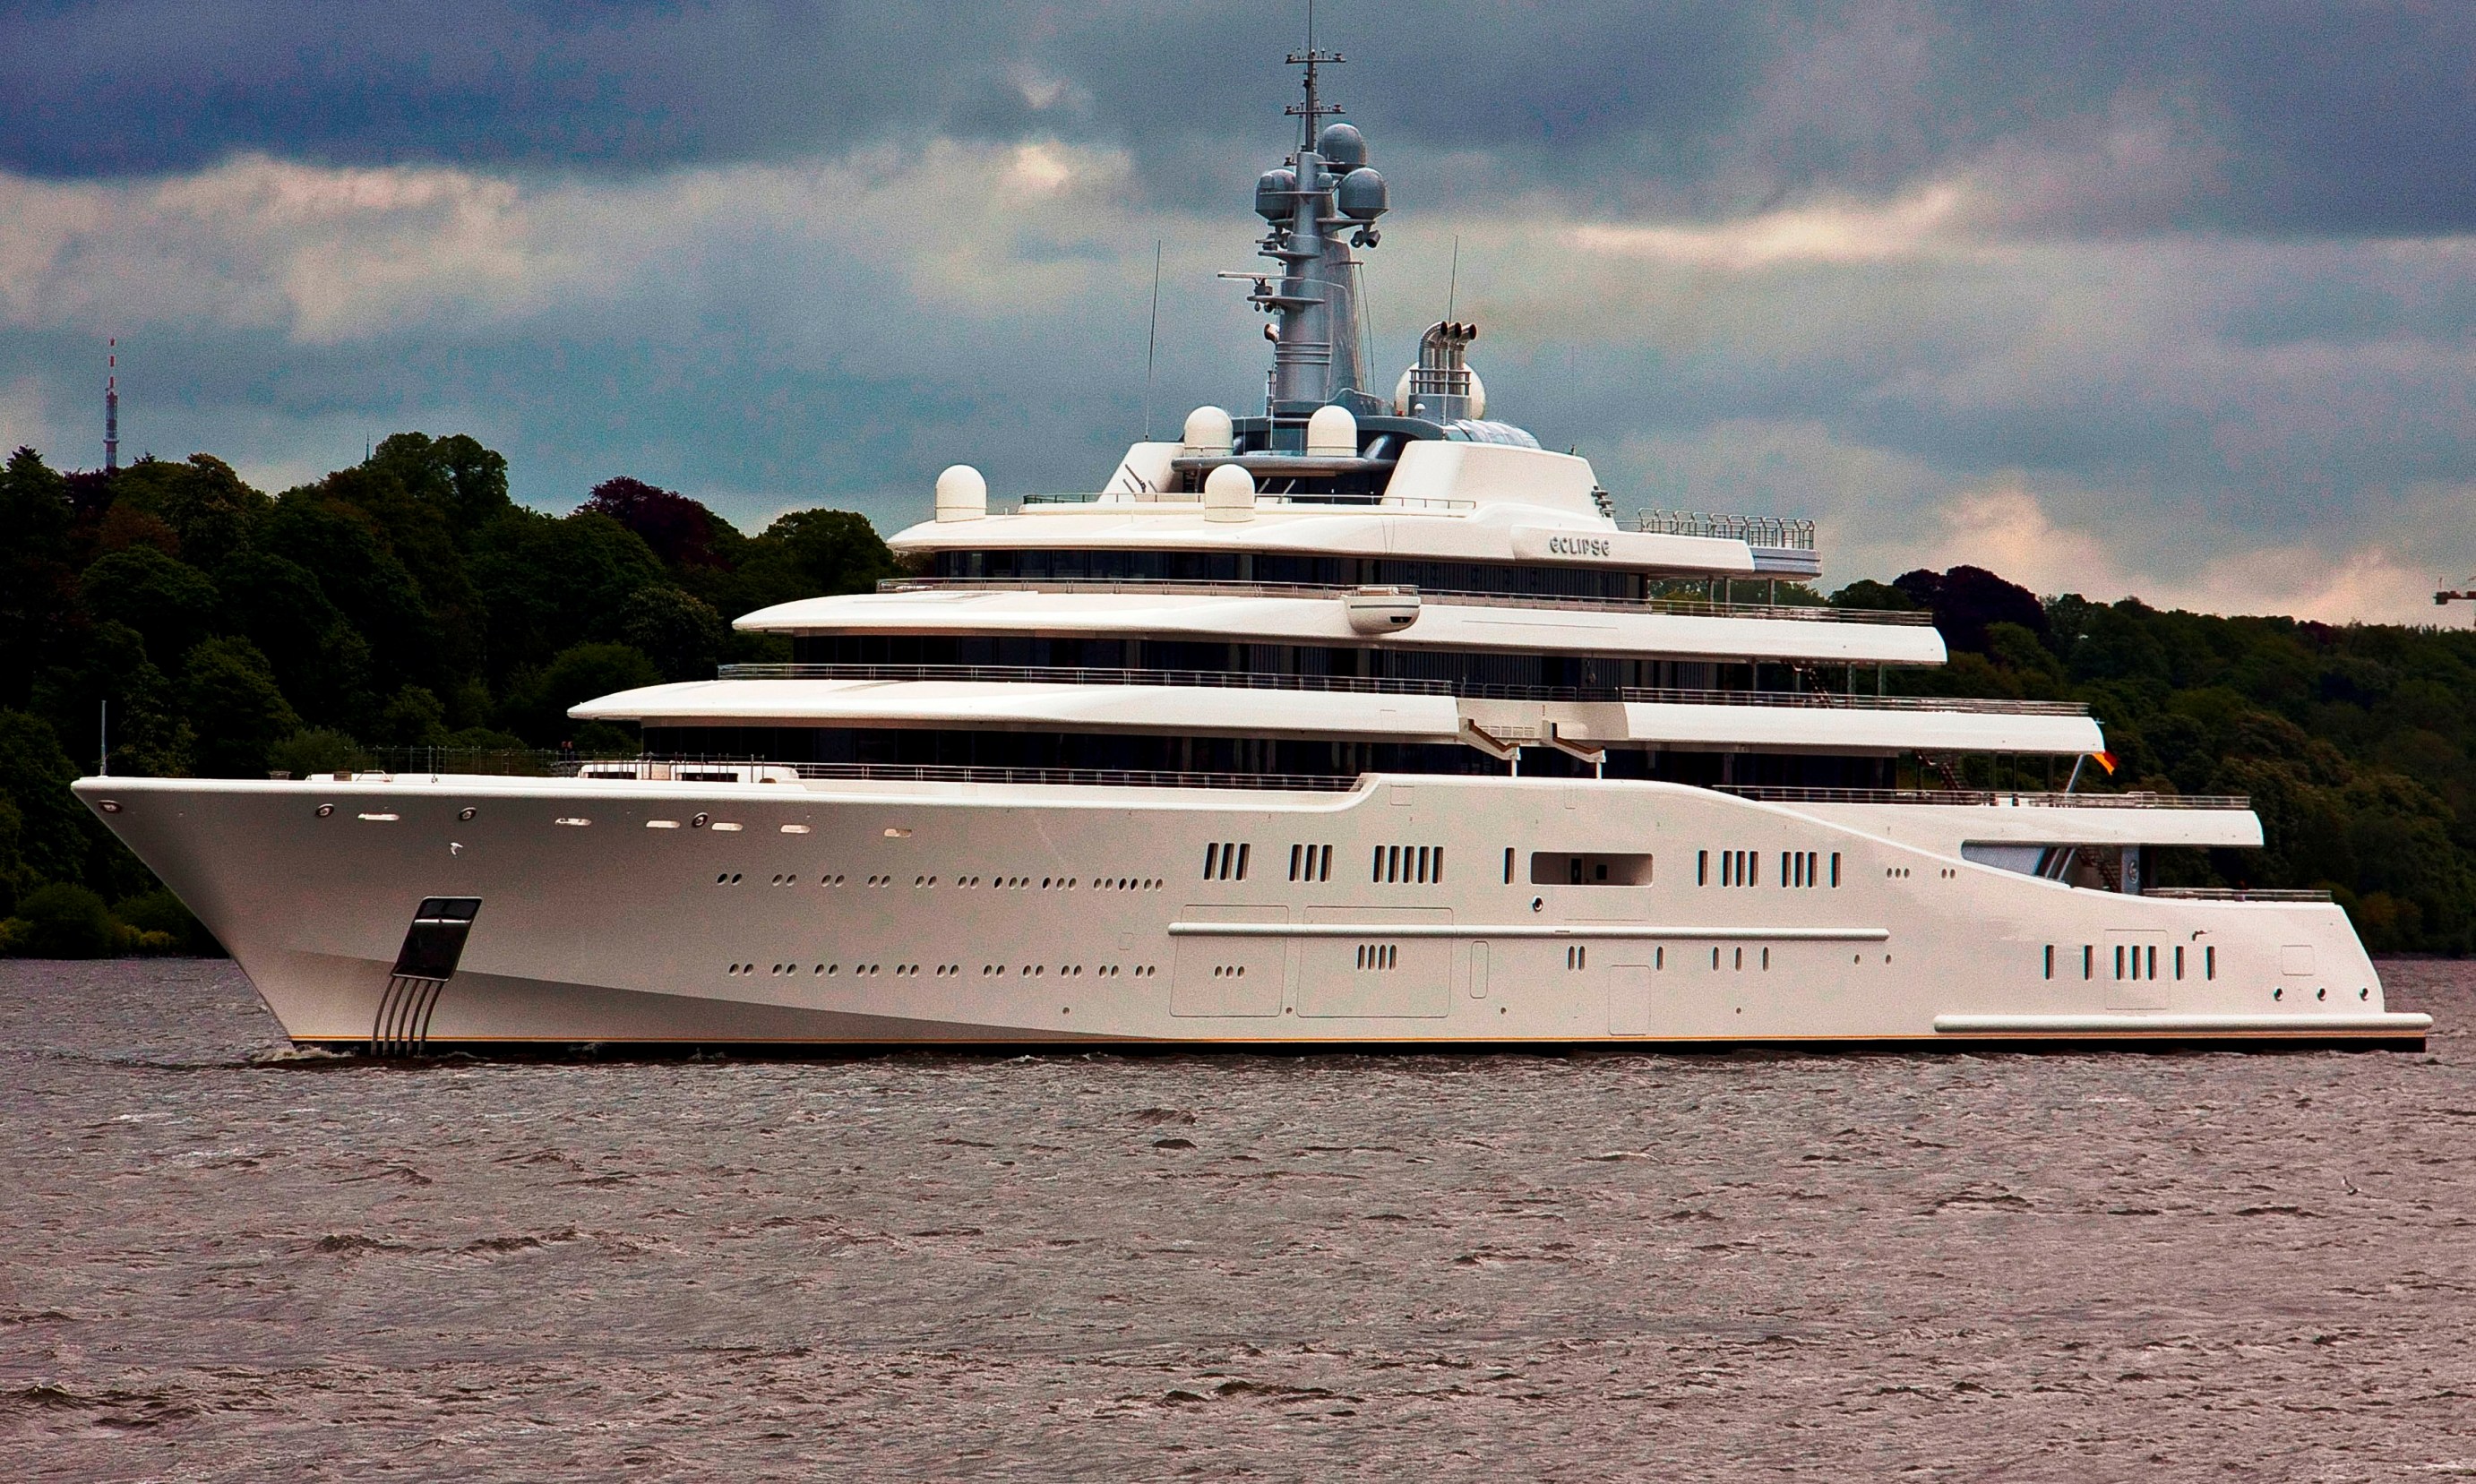 Eclipse Yacht Superyacht Eclipse Owned By Roman Abramovich Is The Largest Private Luxury Yacht In The World Luxury Yacht Browser By Charterworld Superyacht Charter